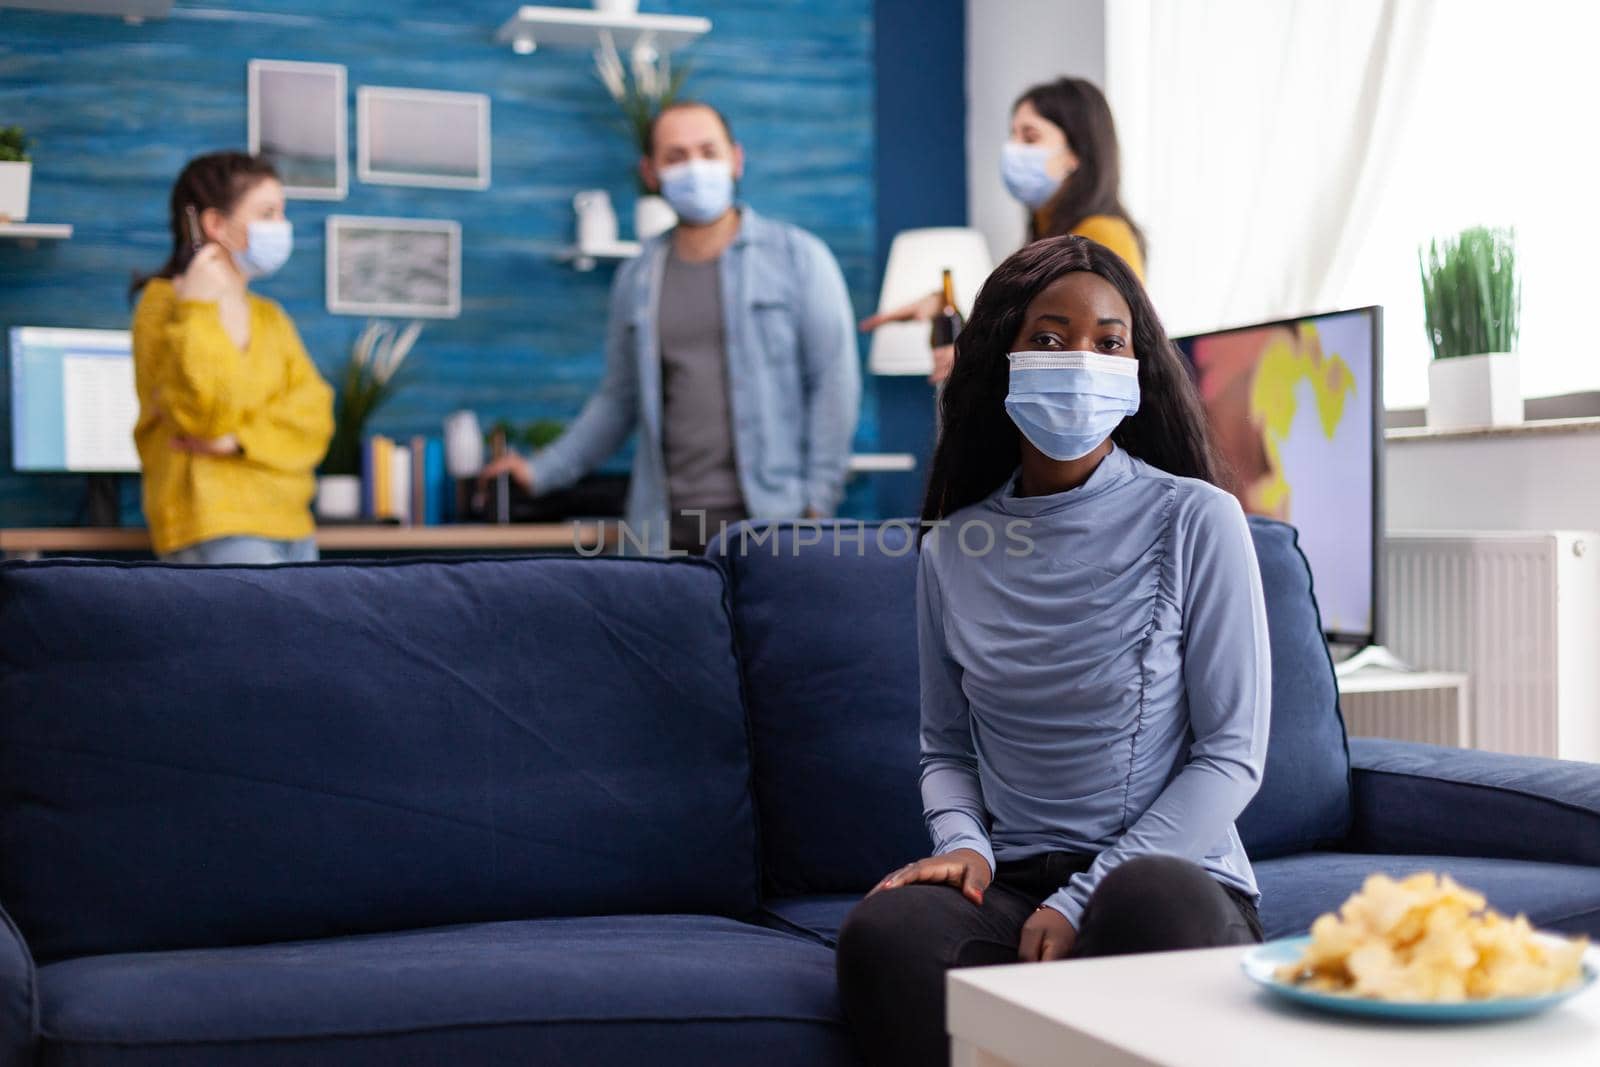 Cheerful african woman enjoying time with friends keeping social distancing wearing face mask to prevent spreading of covid19 as safety precaution following social distancing.